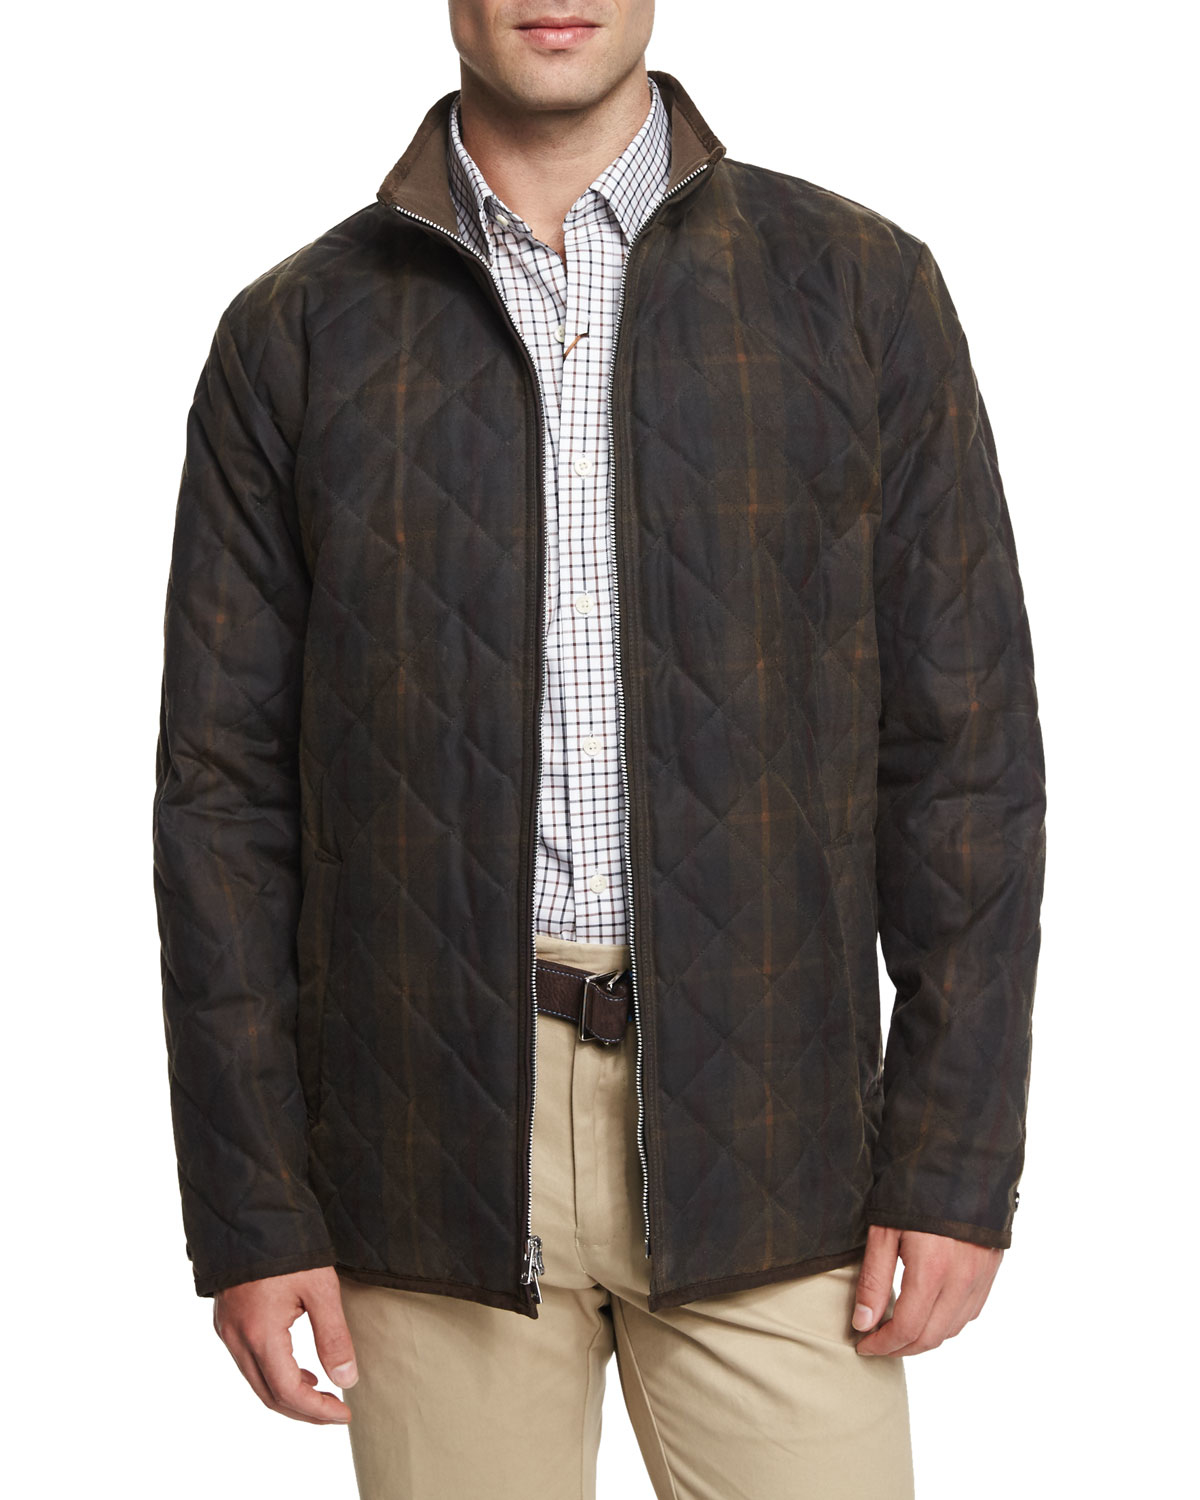 52 HQ Images Peter Millar Clothing : Peter Millar Quilted Zip Vest - Clothing - WPMLR20471 ...